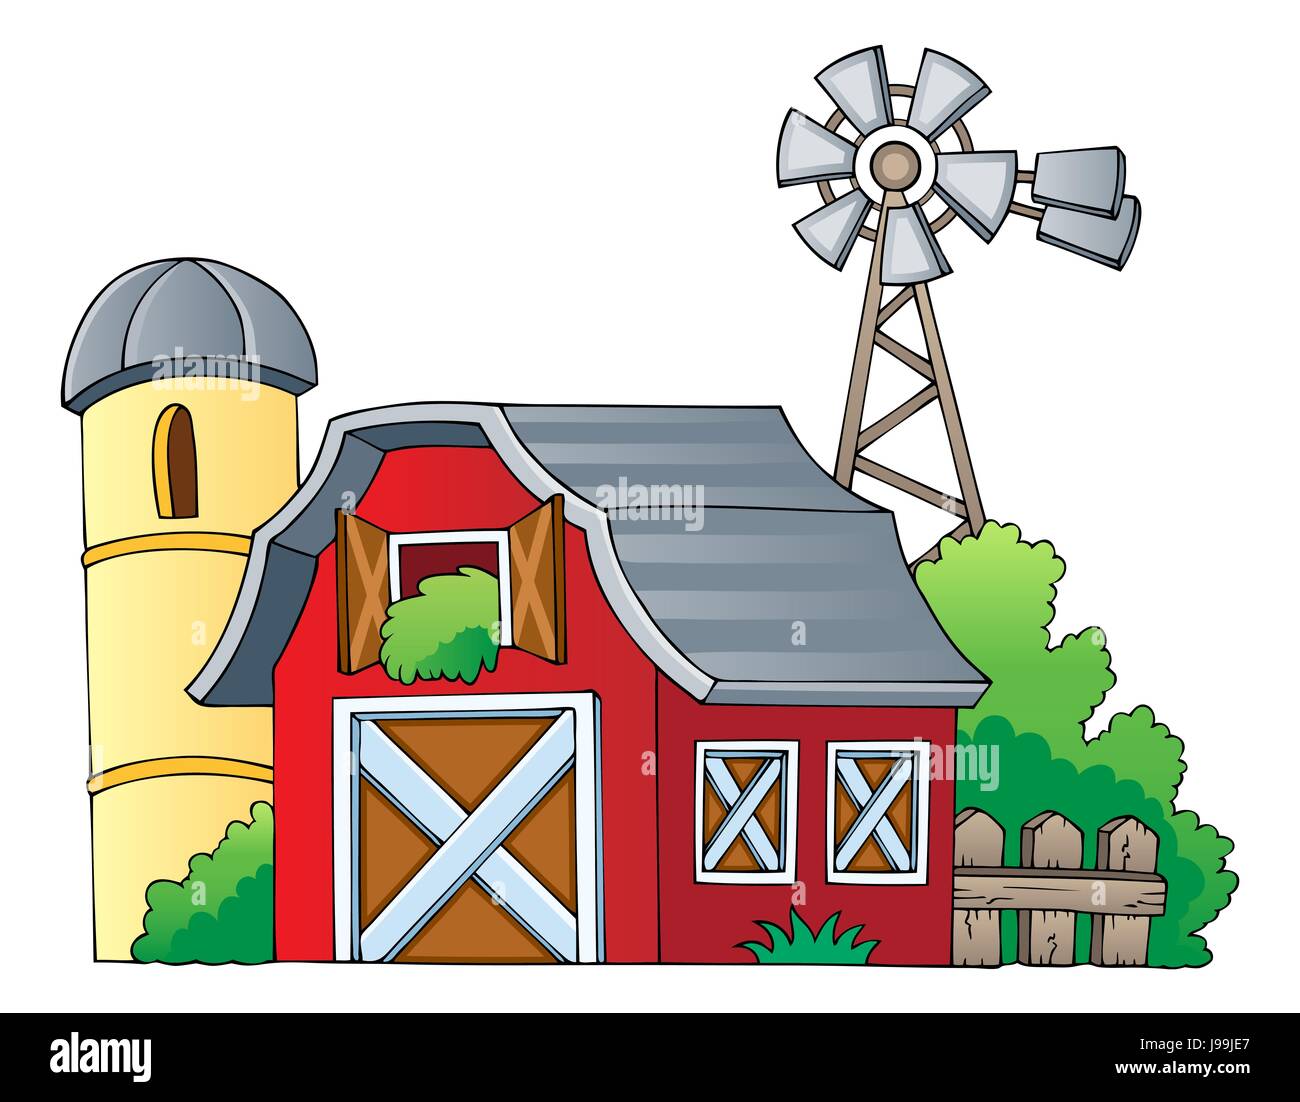 barn, farm, silo, granary, structure, tower, agricultural, art, graphic, Stock Photo